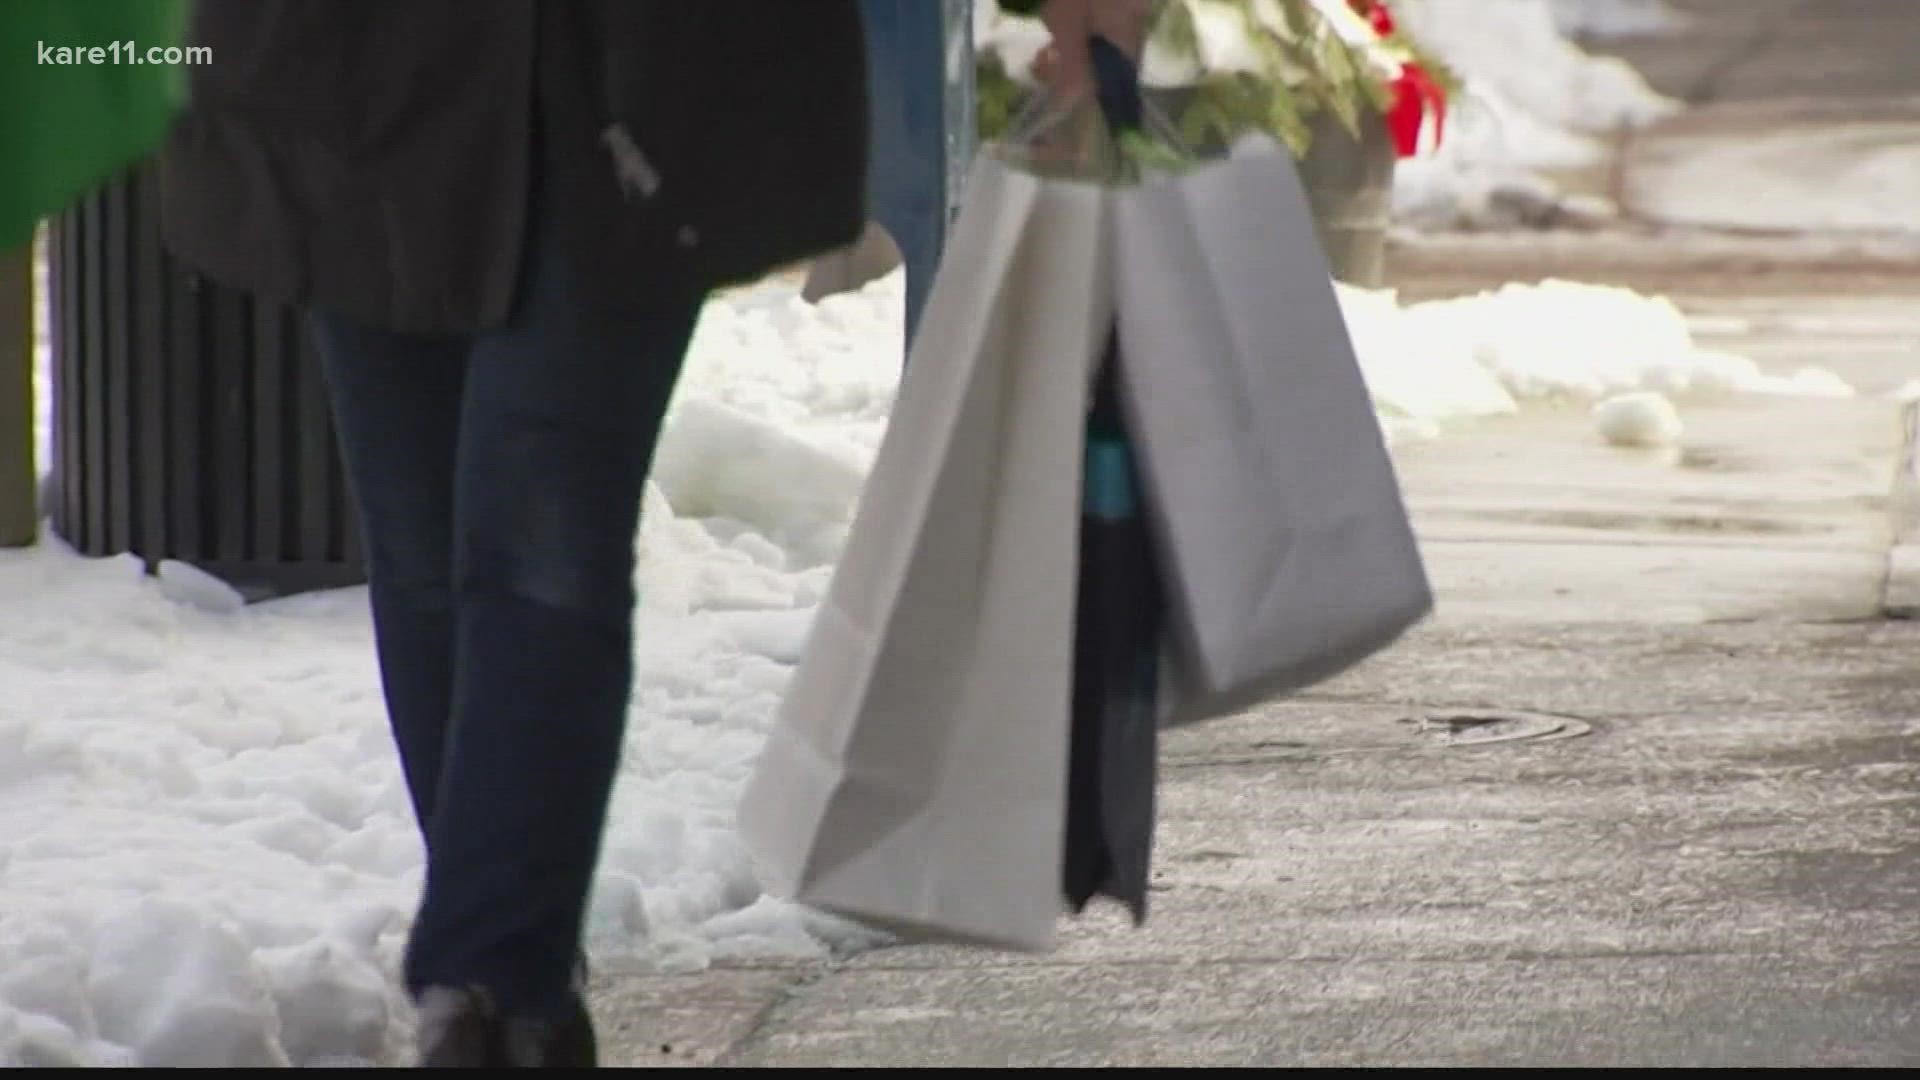 Experts are predicting shoppers will spend more money, and also more time in physical stores this year.